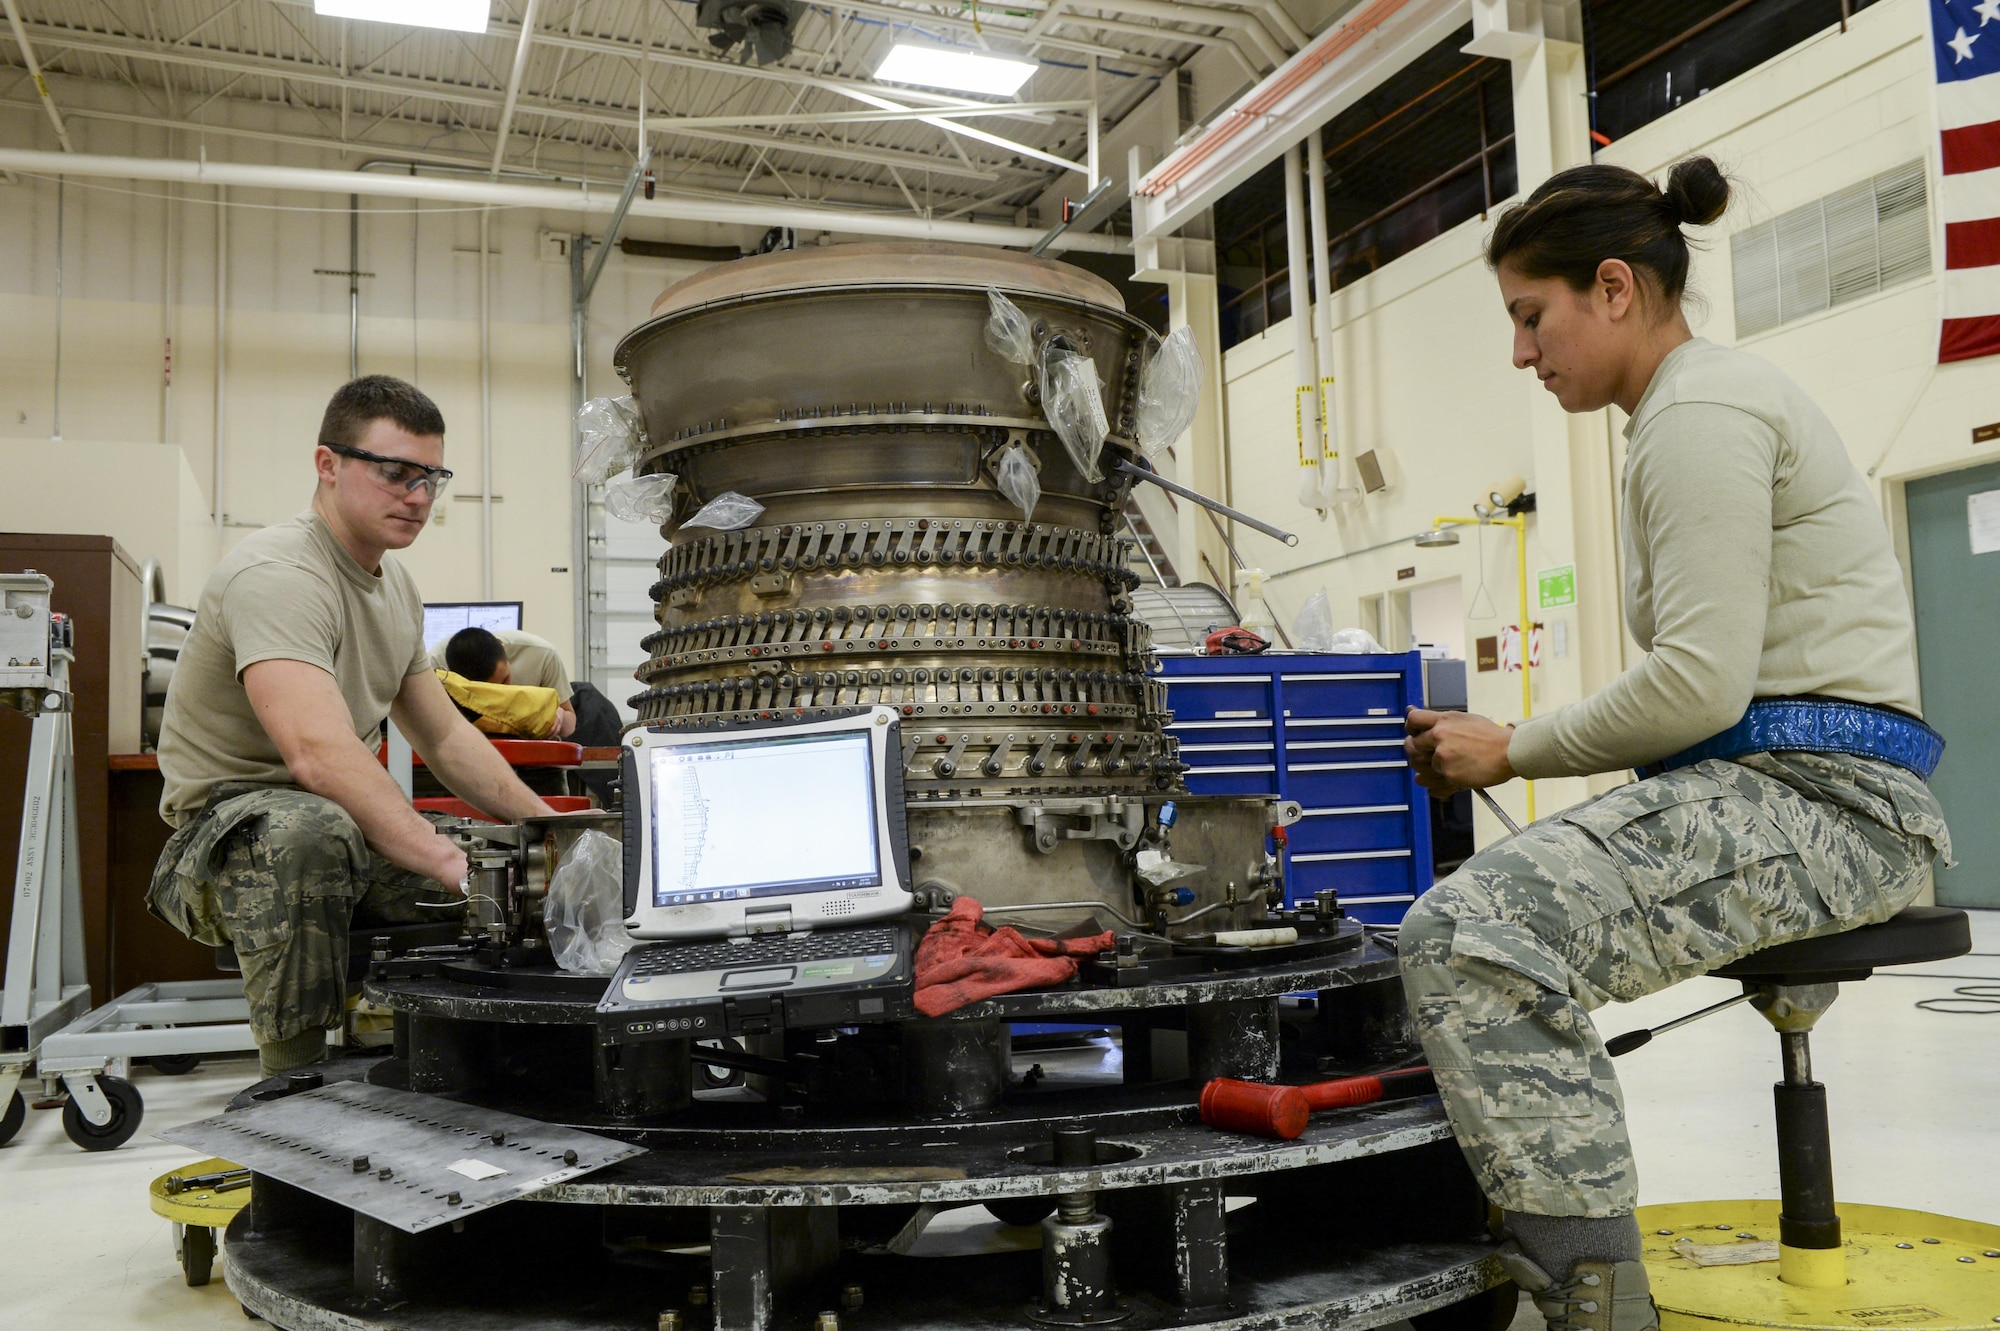 U.S. Air Force Senior Airman Cody Bowman, an aerospace propulsion journeyman, and Staff Sgt. Catalina Cornejo, an aerospace propulsion craftsman, both assigned to the 354th Maintenance Squadron, disassemble an F110-GE-100C jet engine Oct. 8, 2015, during an engine rebuild in the Engine Shop at Eielson Air Force Base, Alaska. Bowman and Cornejo conducted an engine rebuild to find and replace any worn components. (U.S. Air Force photo by Senior Airman Peter Reft/Released)